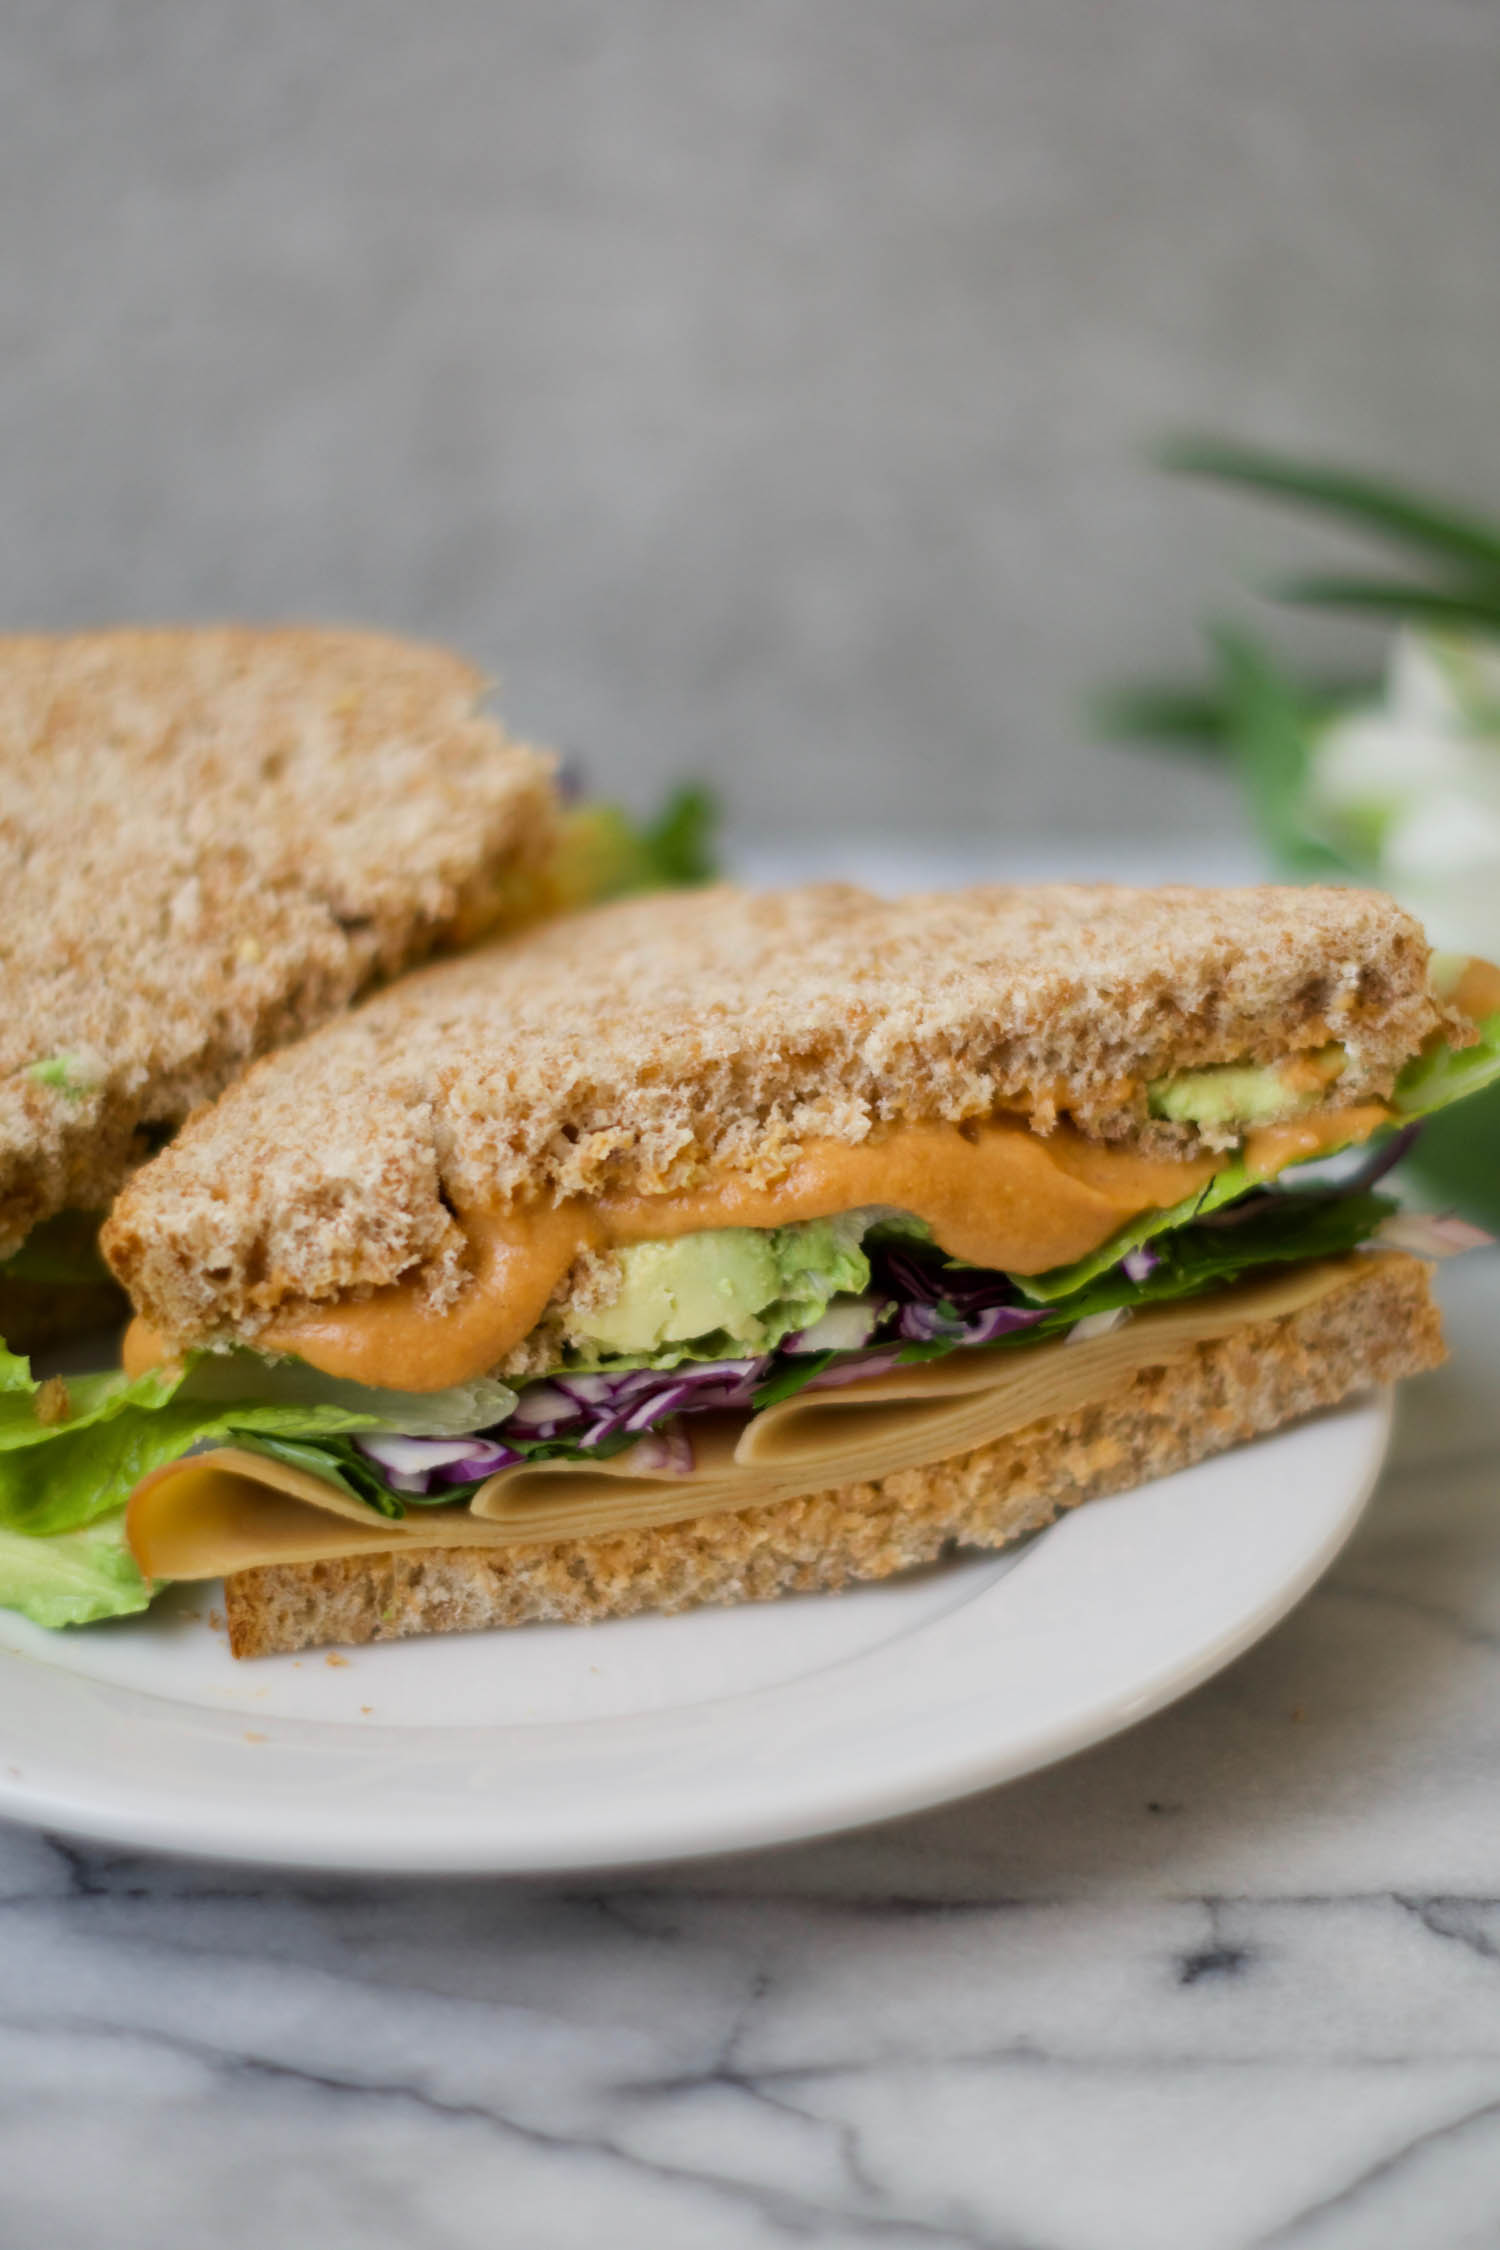 Vegan Chipotle Mayo makes a great sandwich spread!